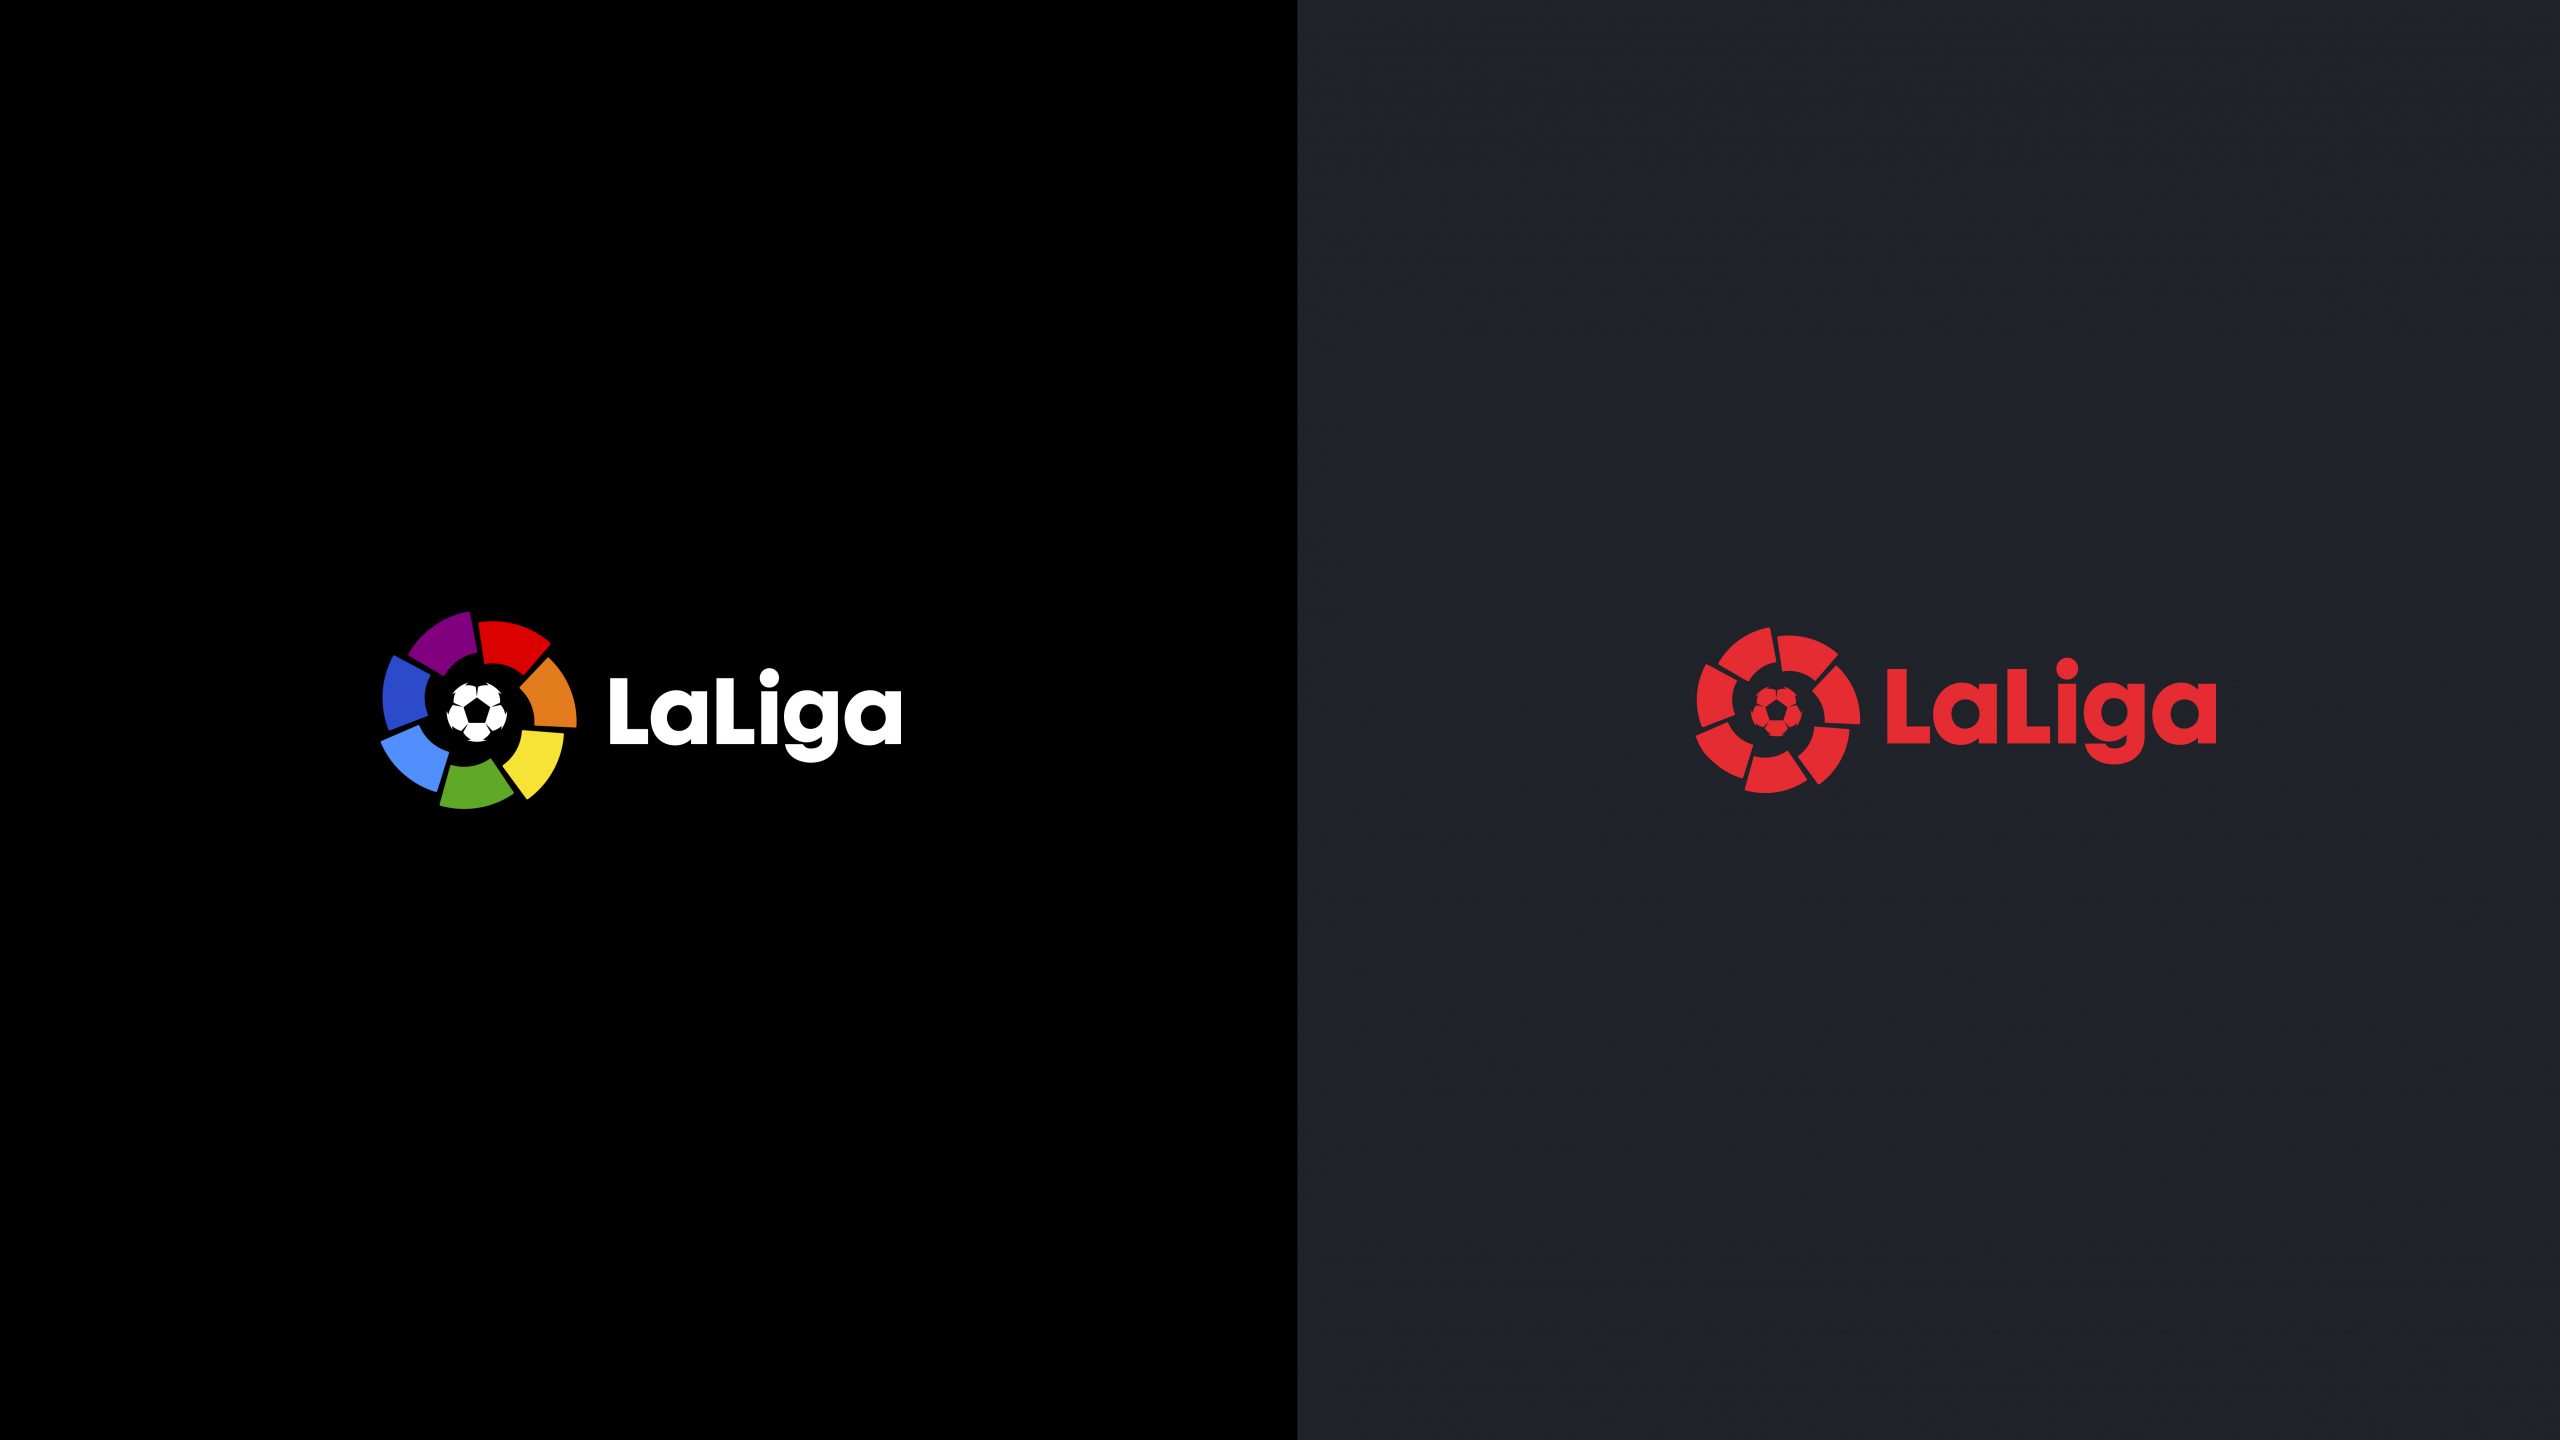 LaLiga's logo and logo in solid red


